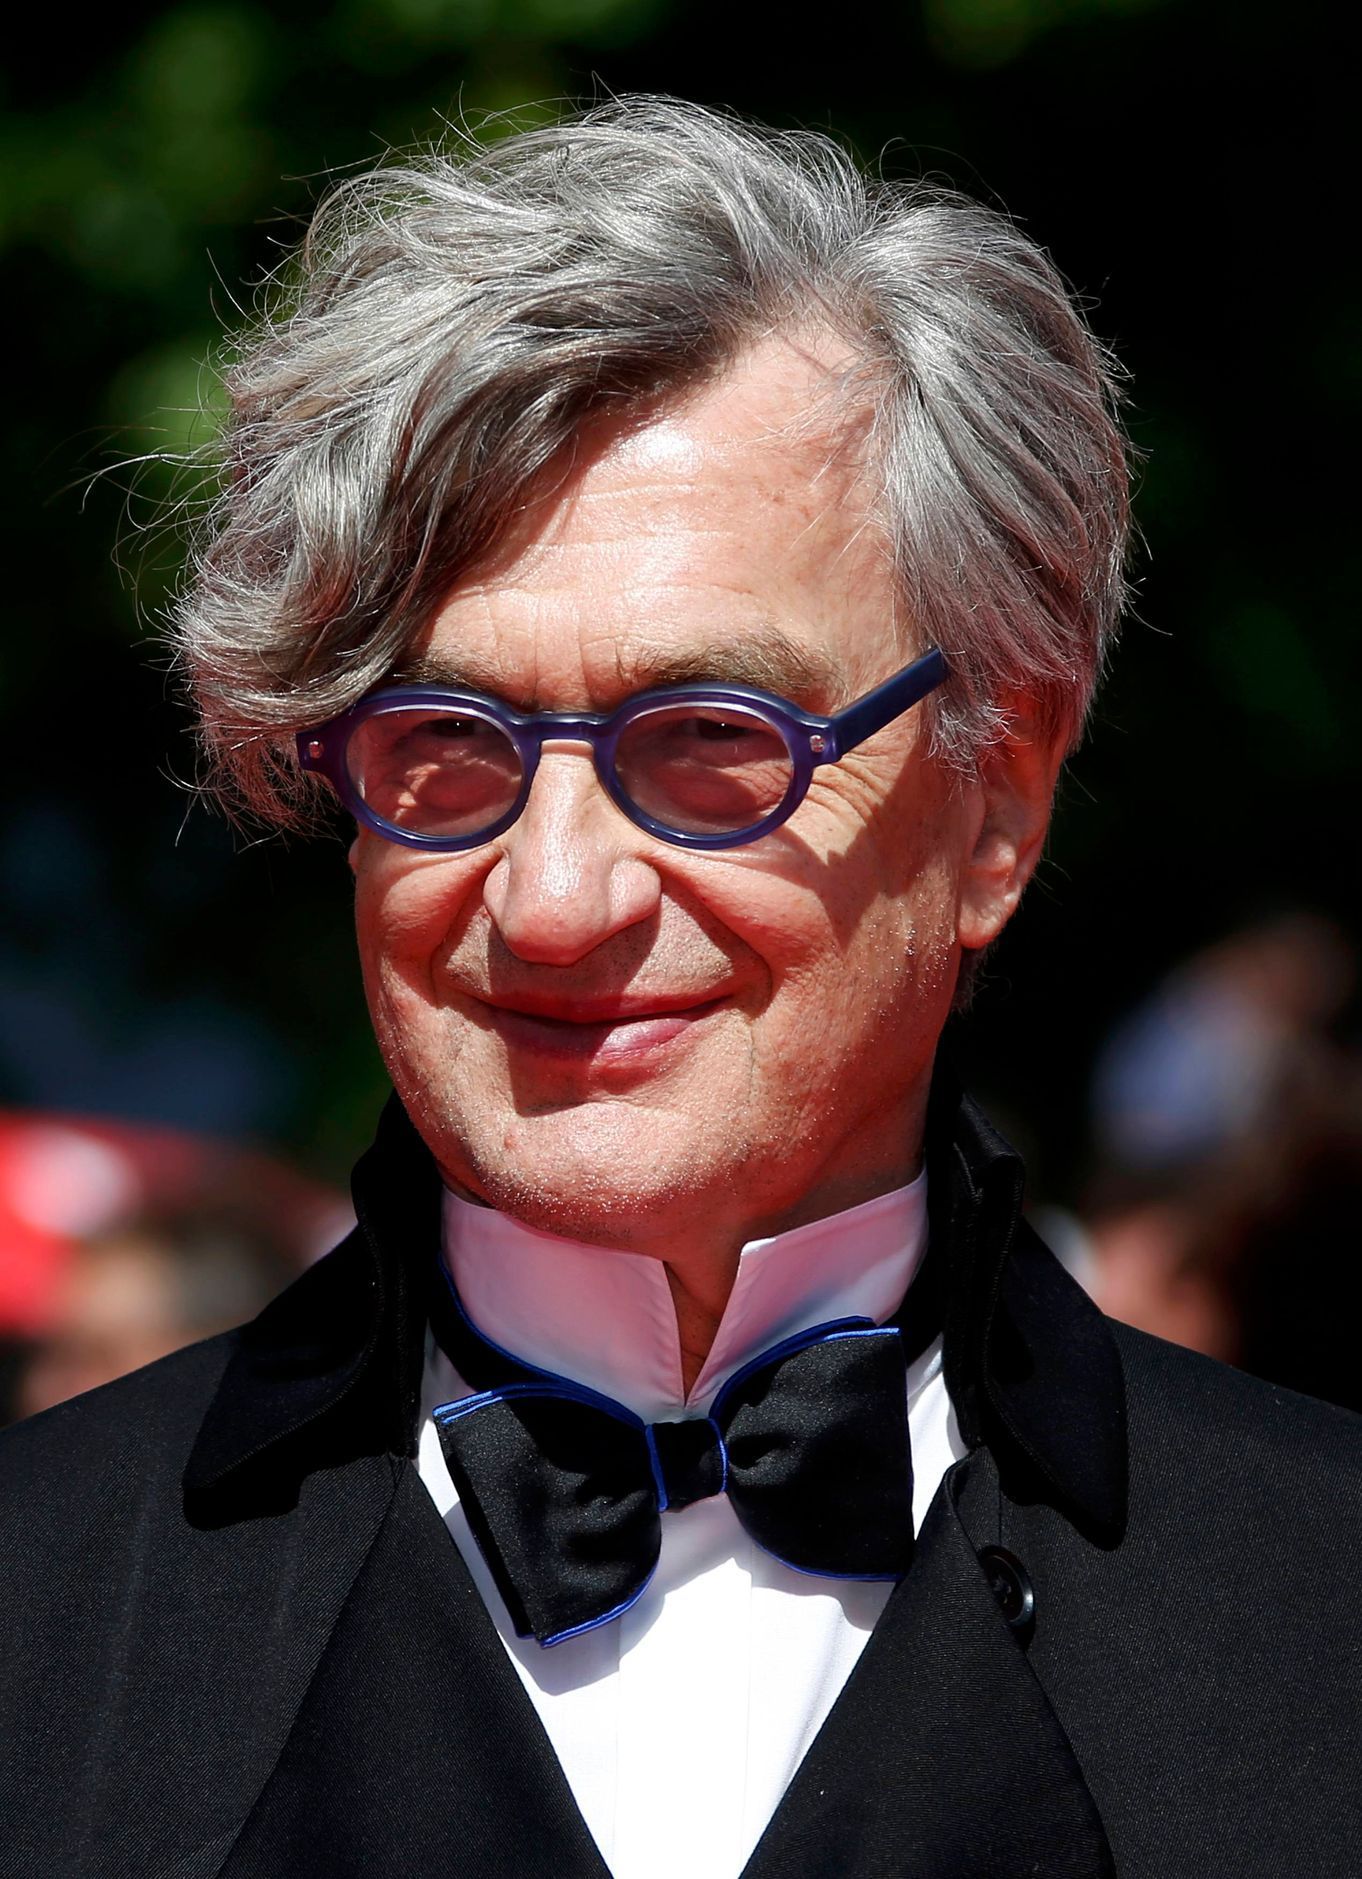 Director Wim Wenders poses on the red carpet as they arrive for the screening of the film &quot;Futatsume no mado&quot; in competition at the 67th Cannes Film Festival